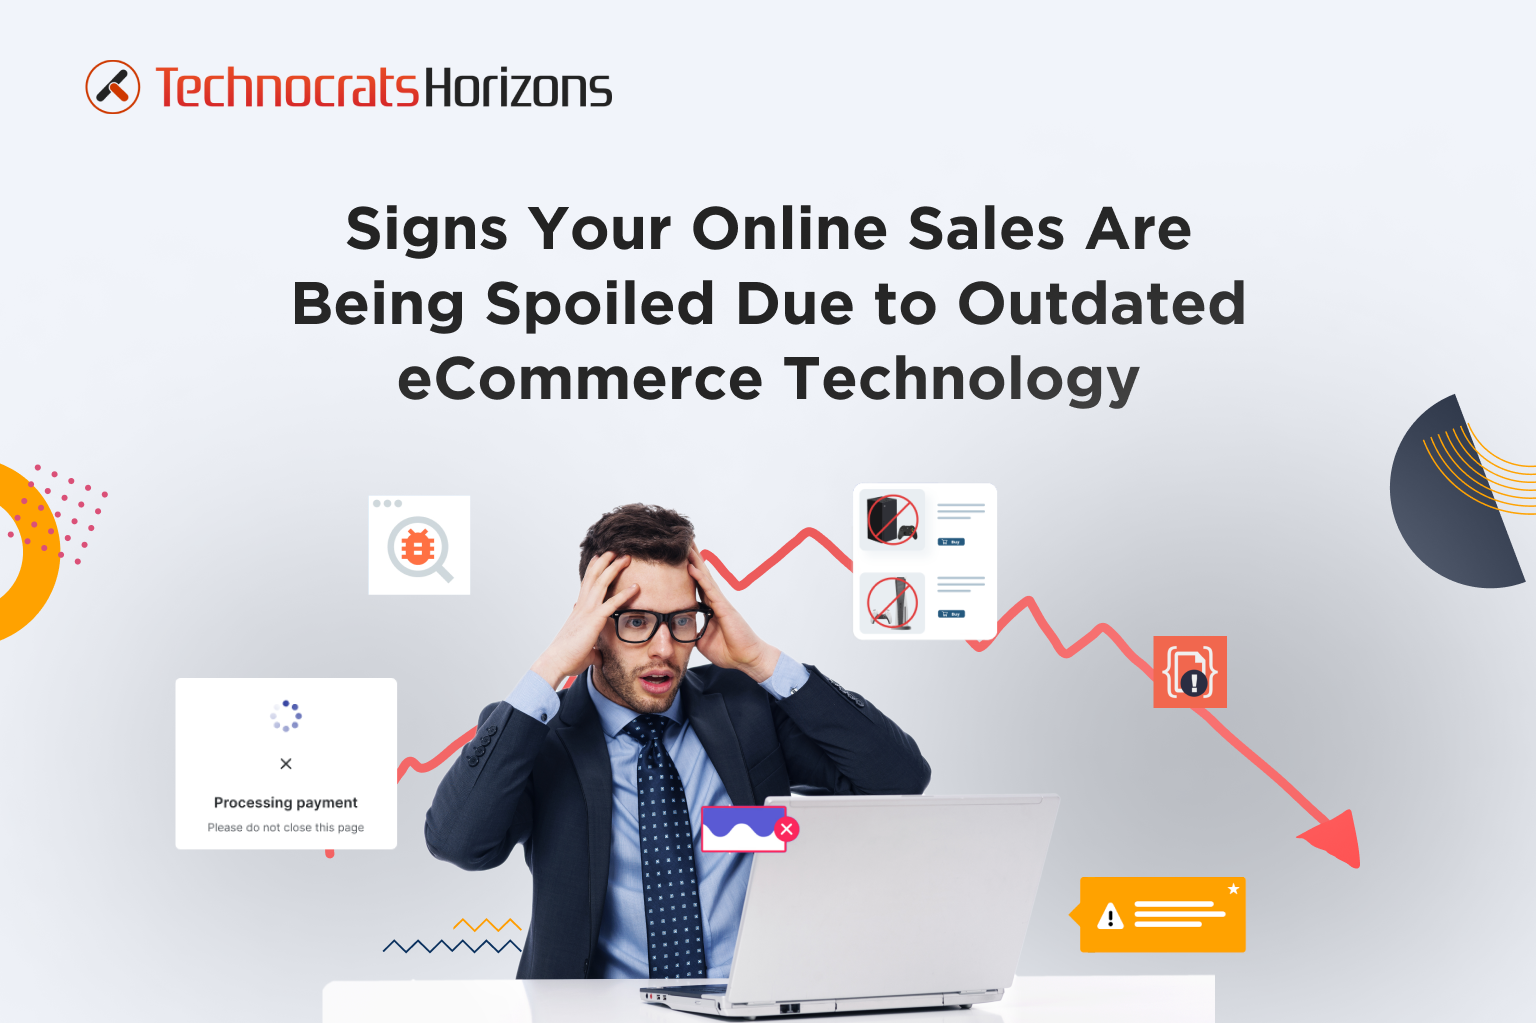 Signs Your Online Sales Are Being Affected Due to Outdated eCommerce Technology